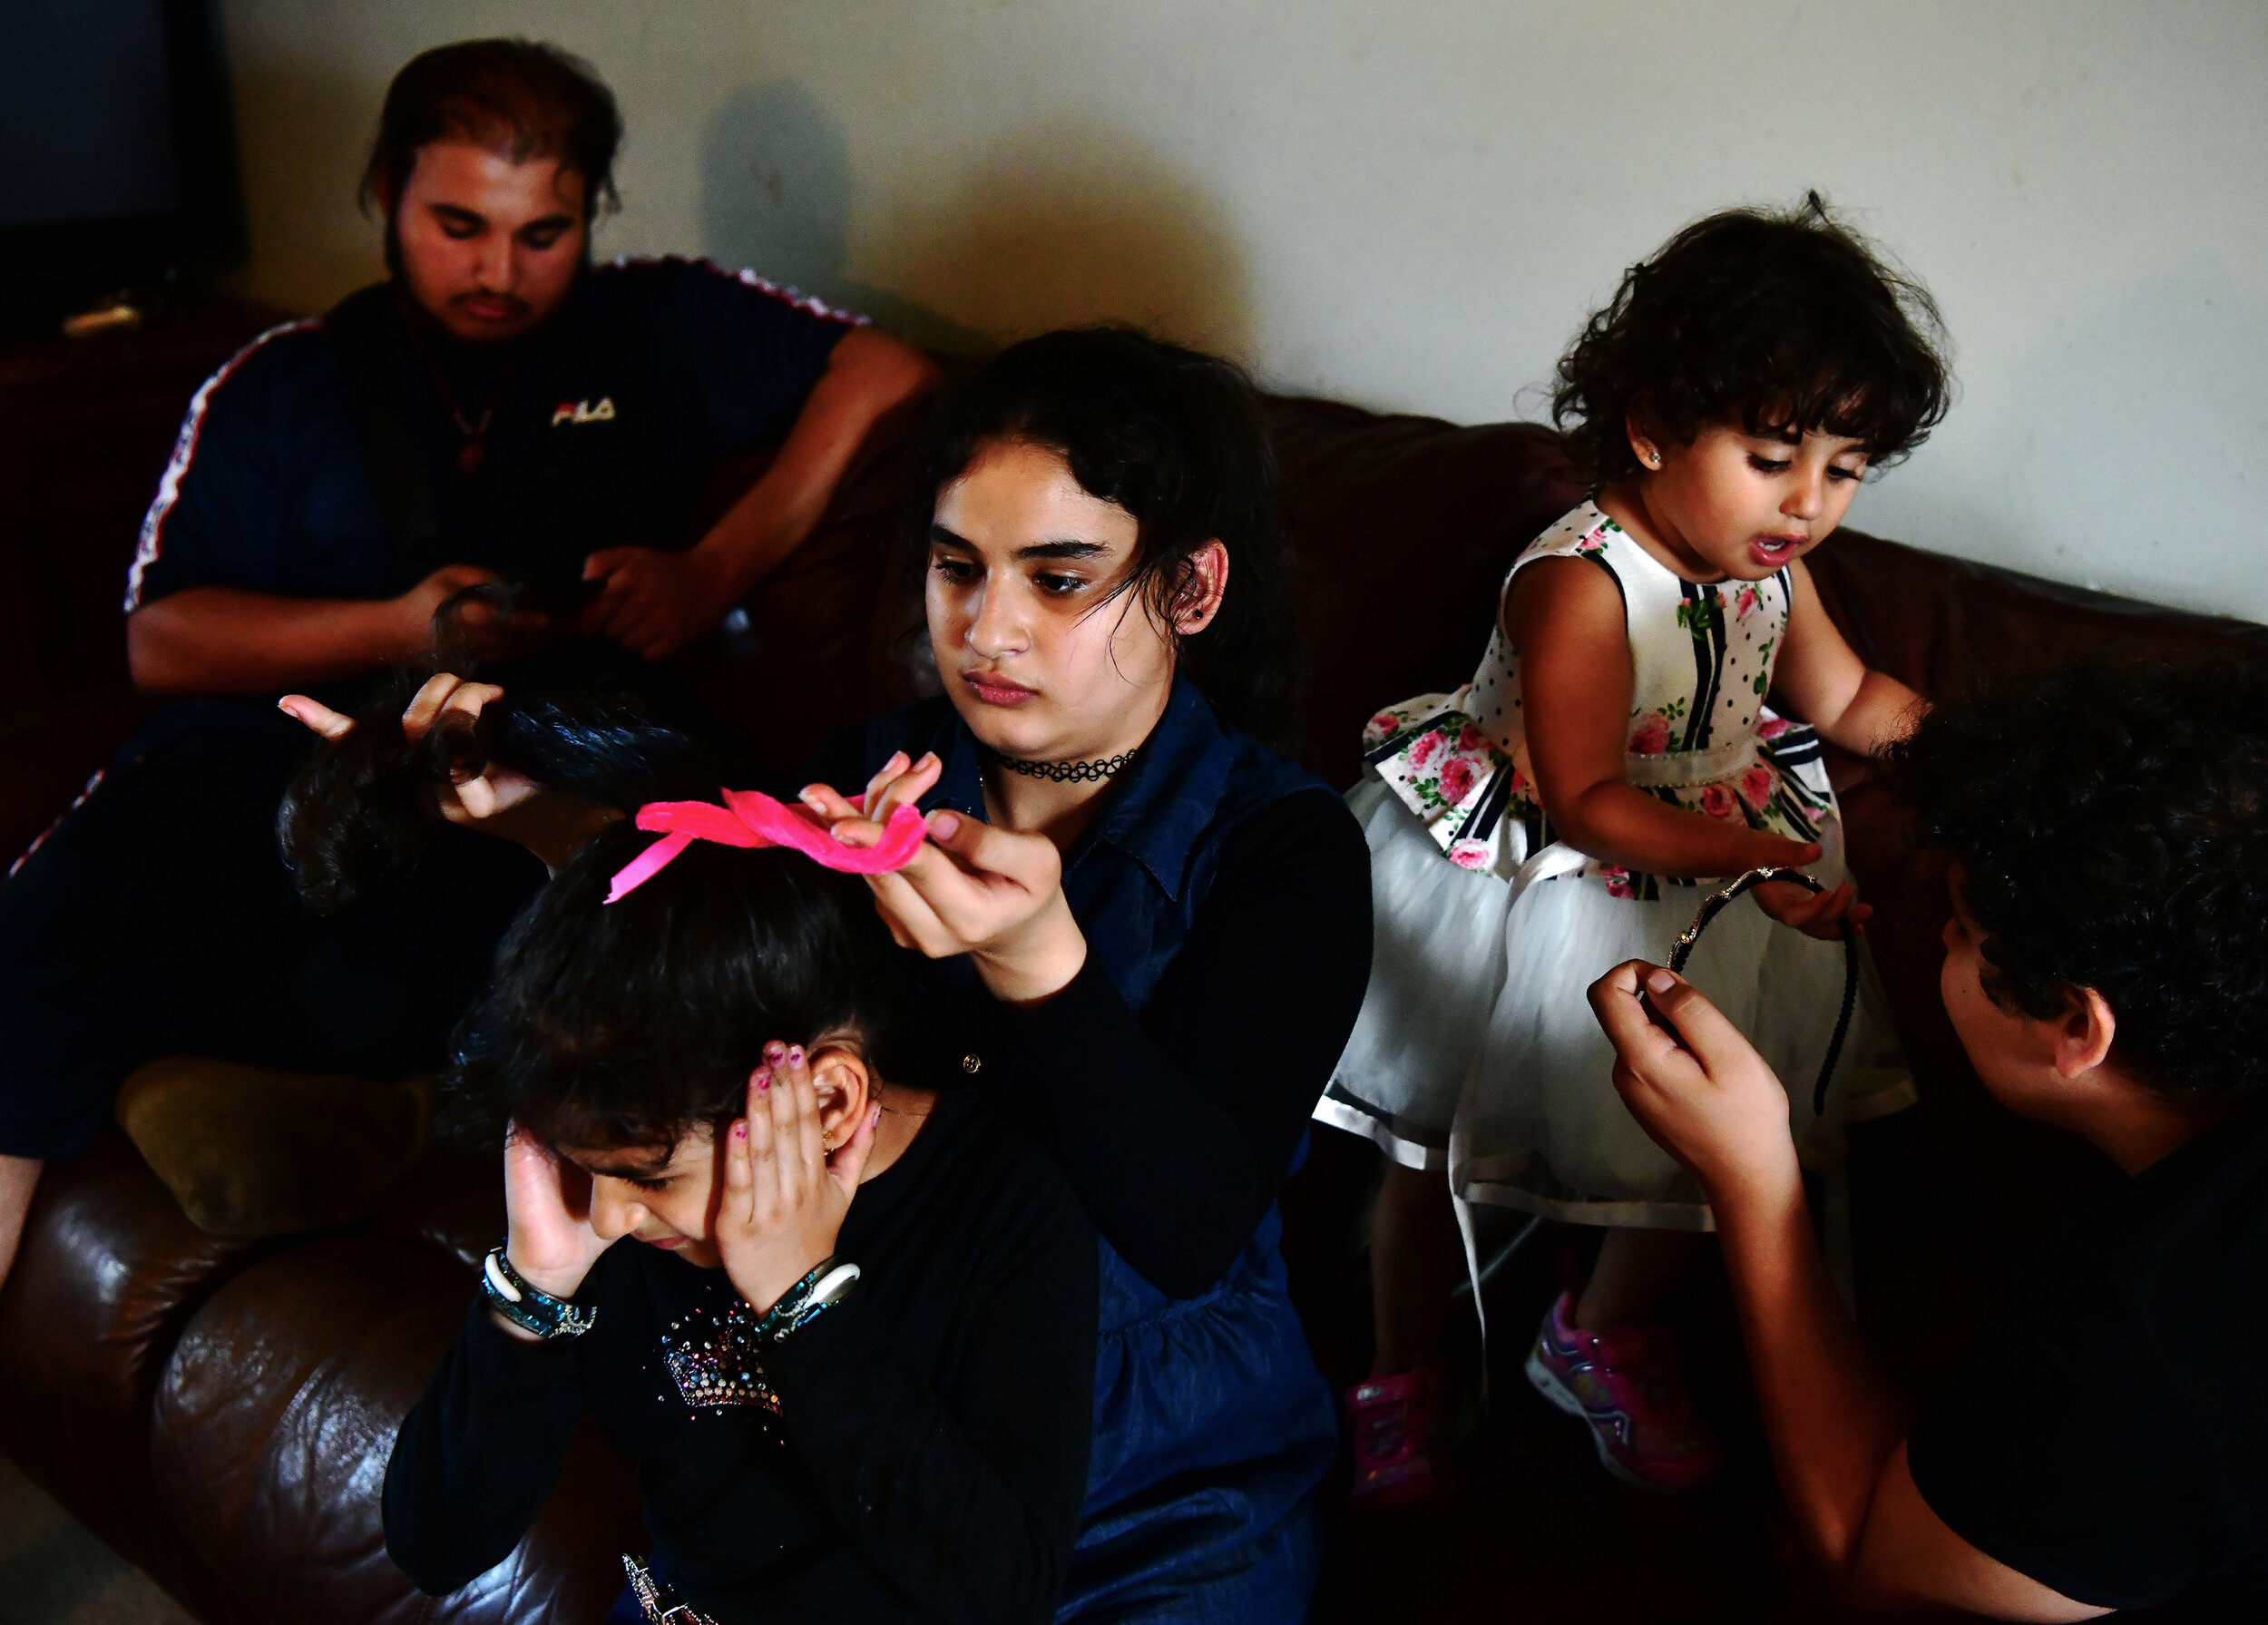  Narjes Al Hraishawi, 14, ties her younger sister’s, Fatima’s, hair Asinat, right, 2, tries to grab her headband from her older brother, Ali, 12. Abbas, left, 17, watches Youtube videos before driving two of the children to a carnival on Friday, Augu